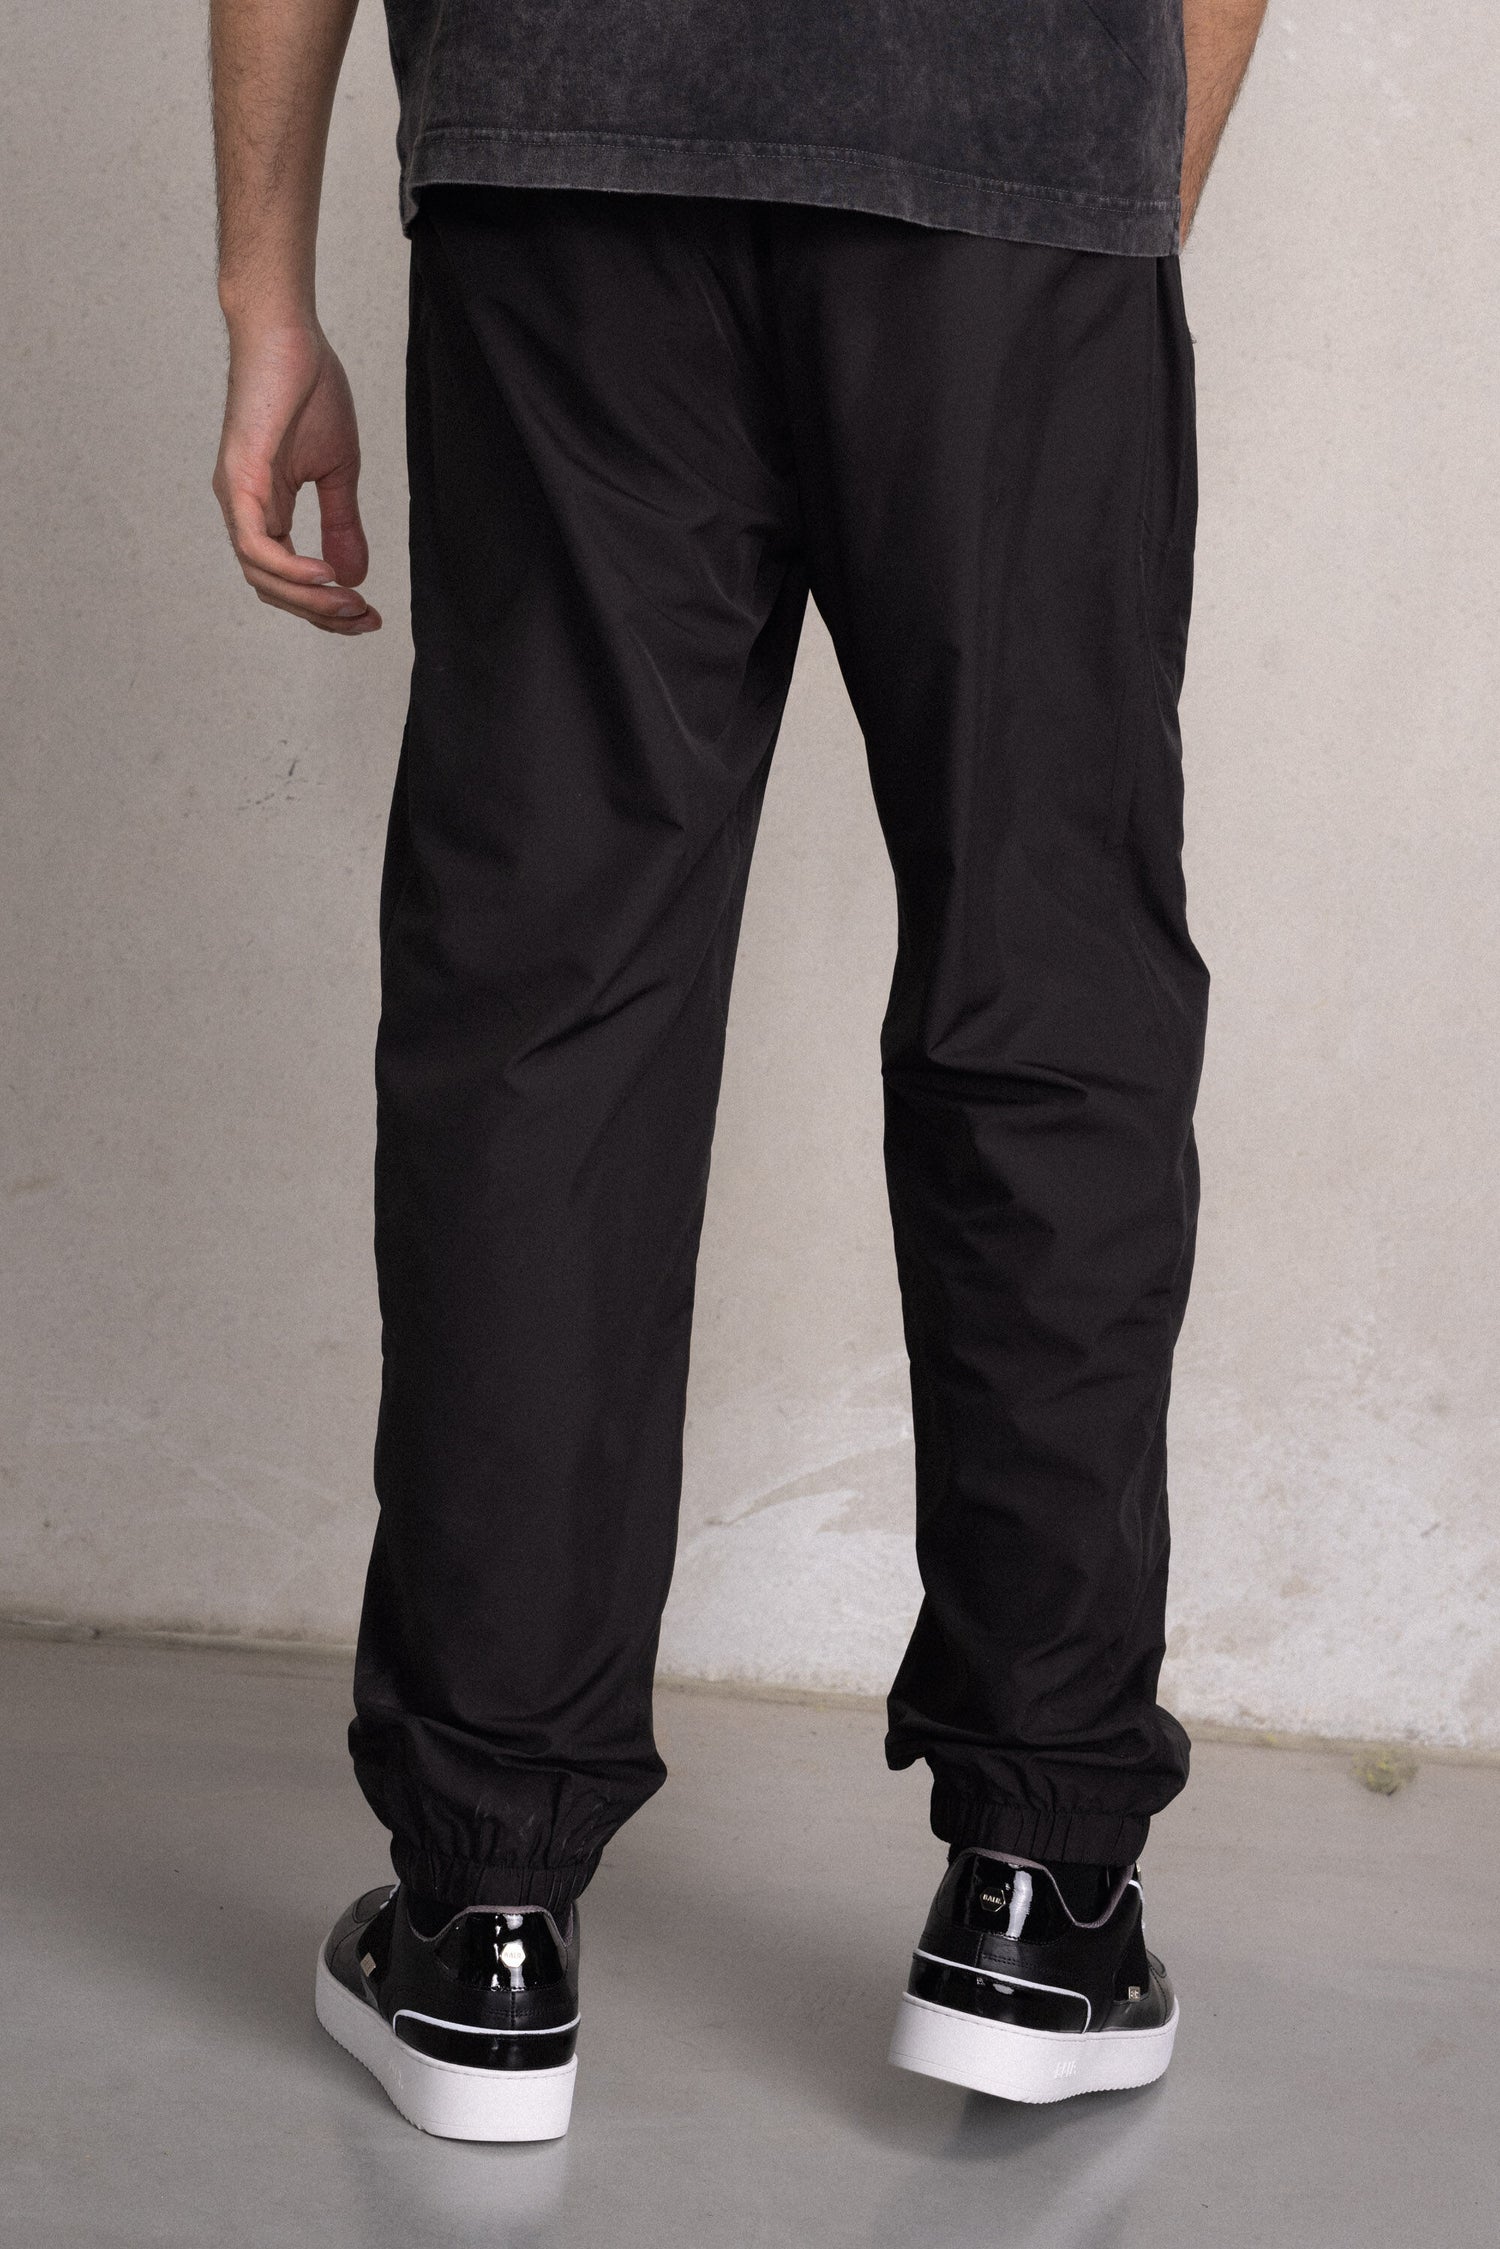 Fear of God Essentials Jet Black Relaxed Trousers | PacSun